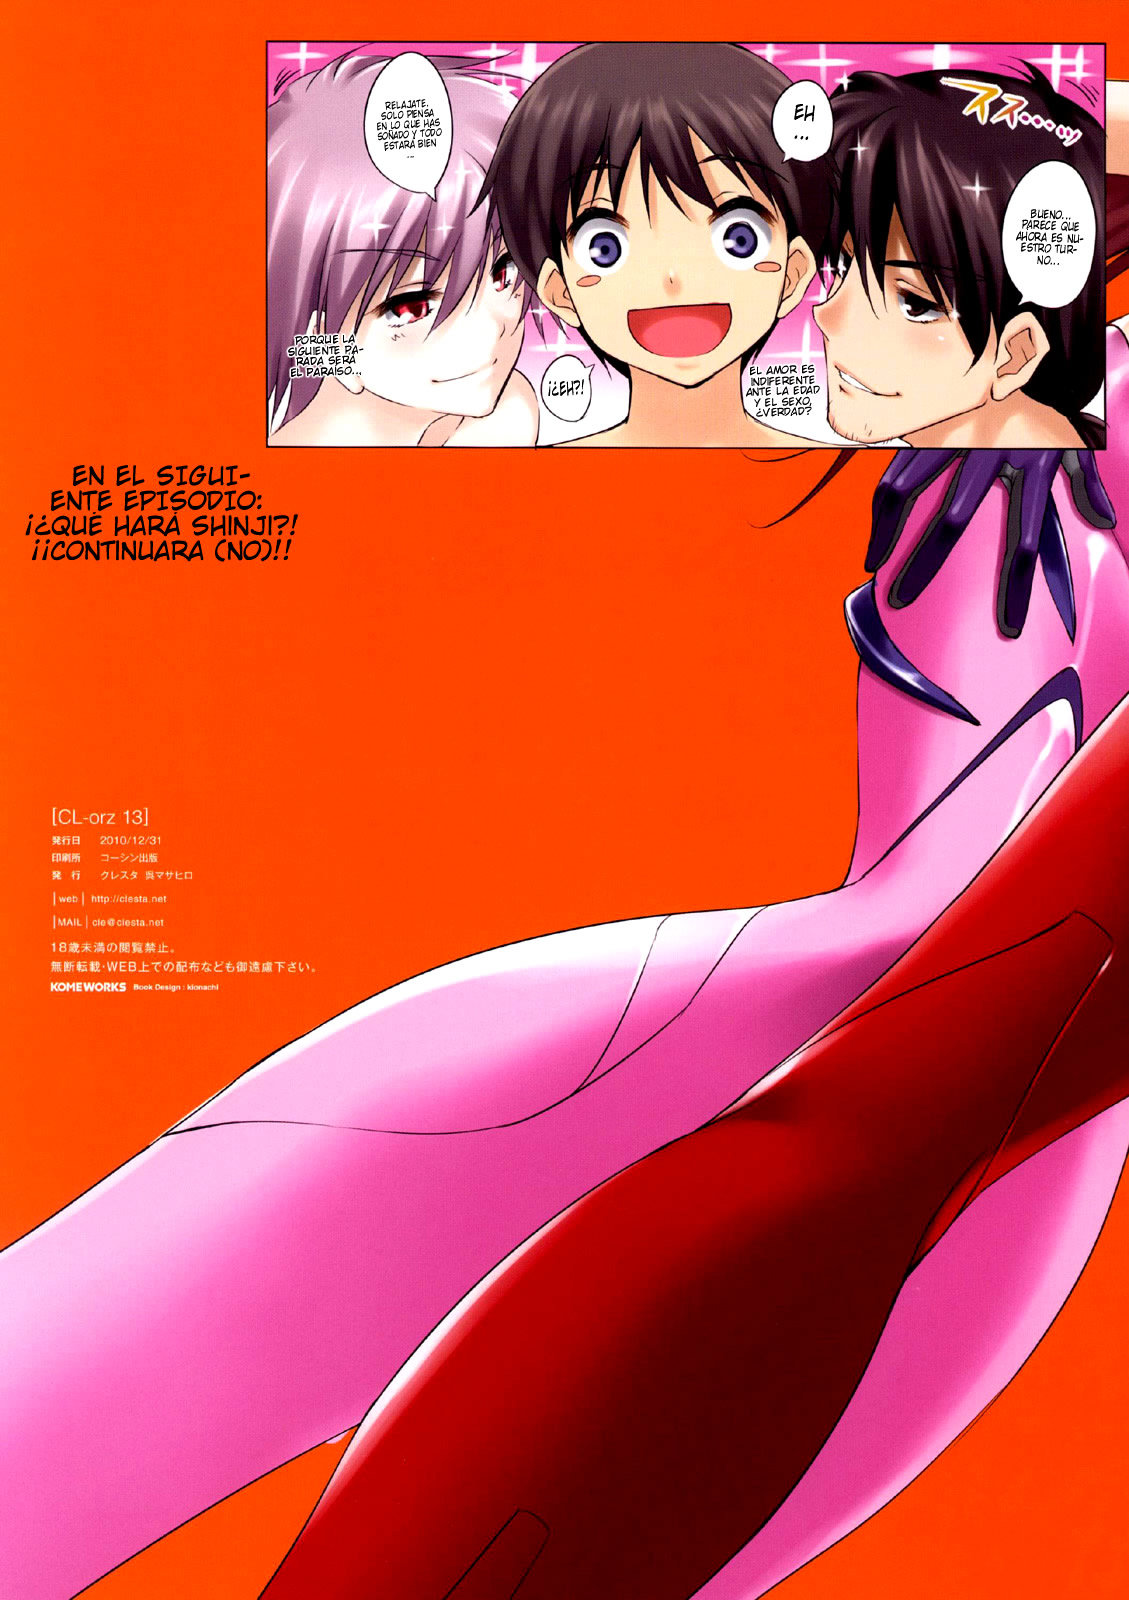 CL-orz 13 You Can (Not) Advance (uncensored) (Neon Genesis Evangelion) - Cle Masahi - 14